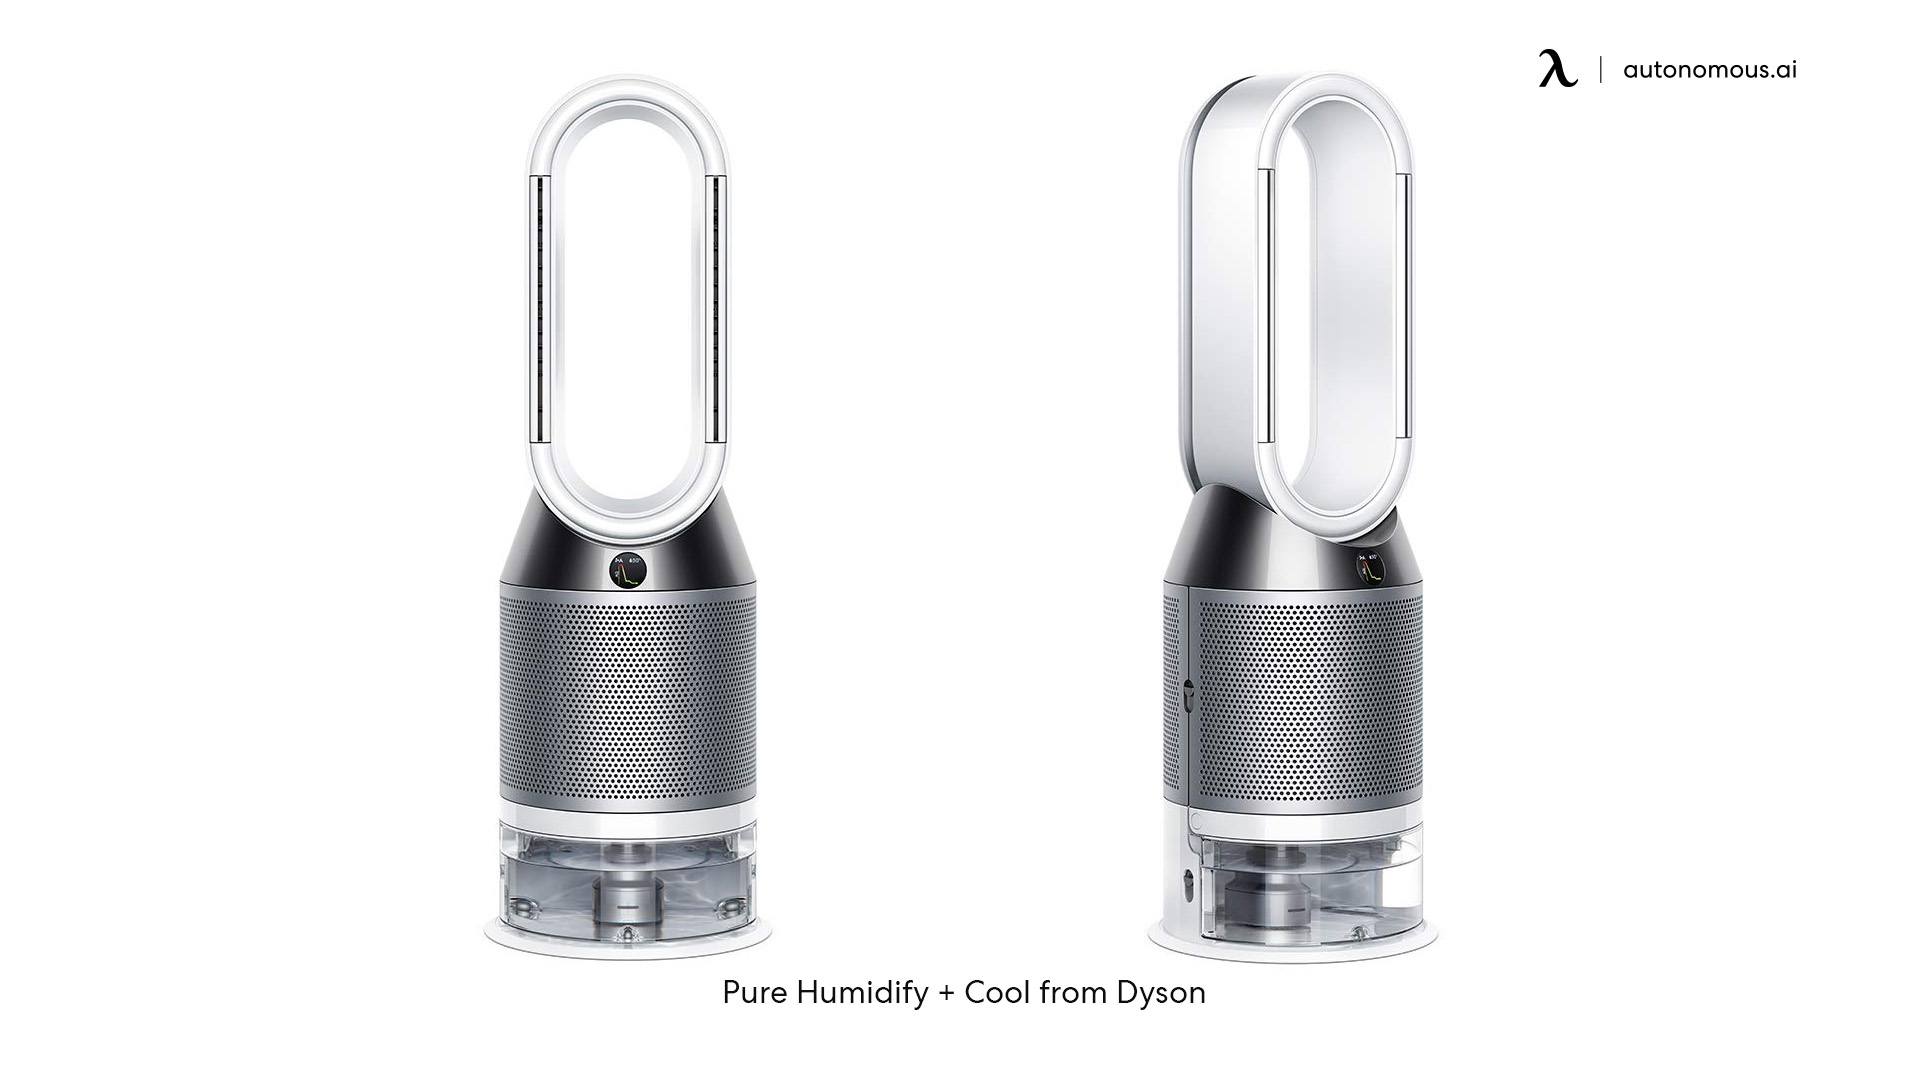 Pure Humidify + Cool from Dyson